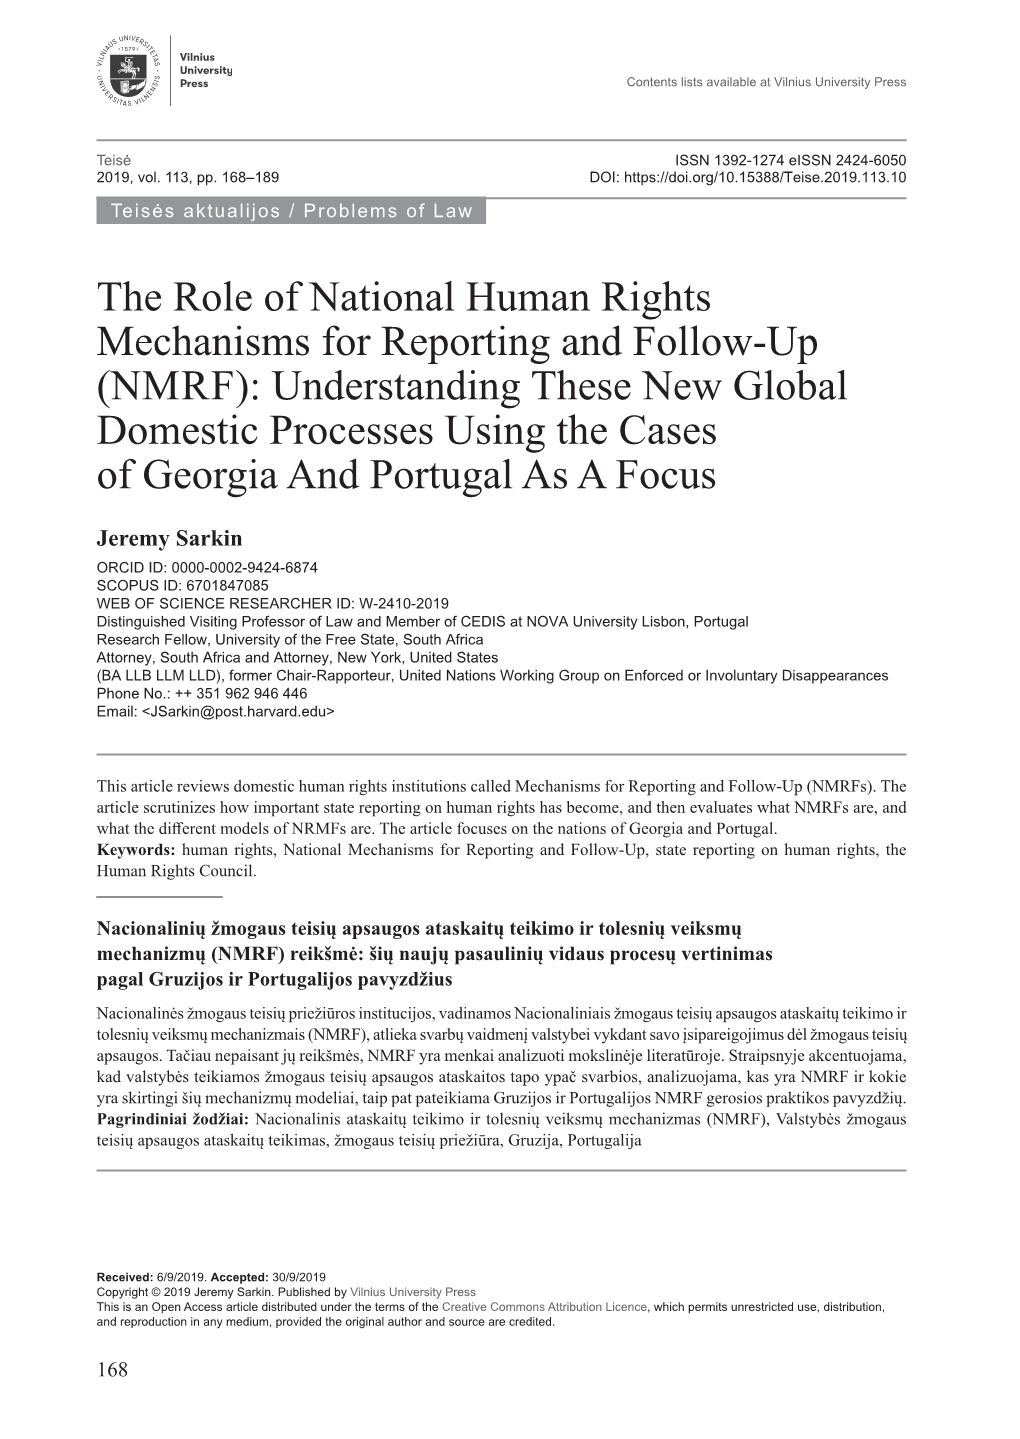 The Role of National Human Rights Mechanisms For